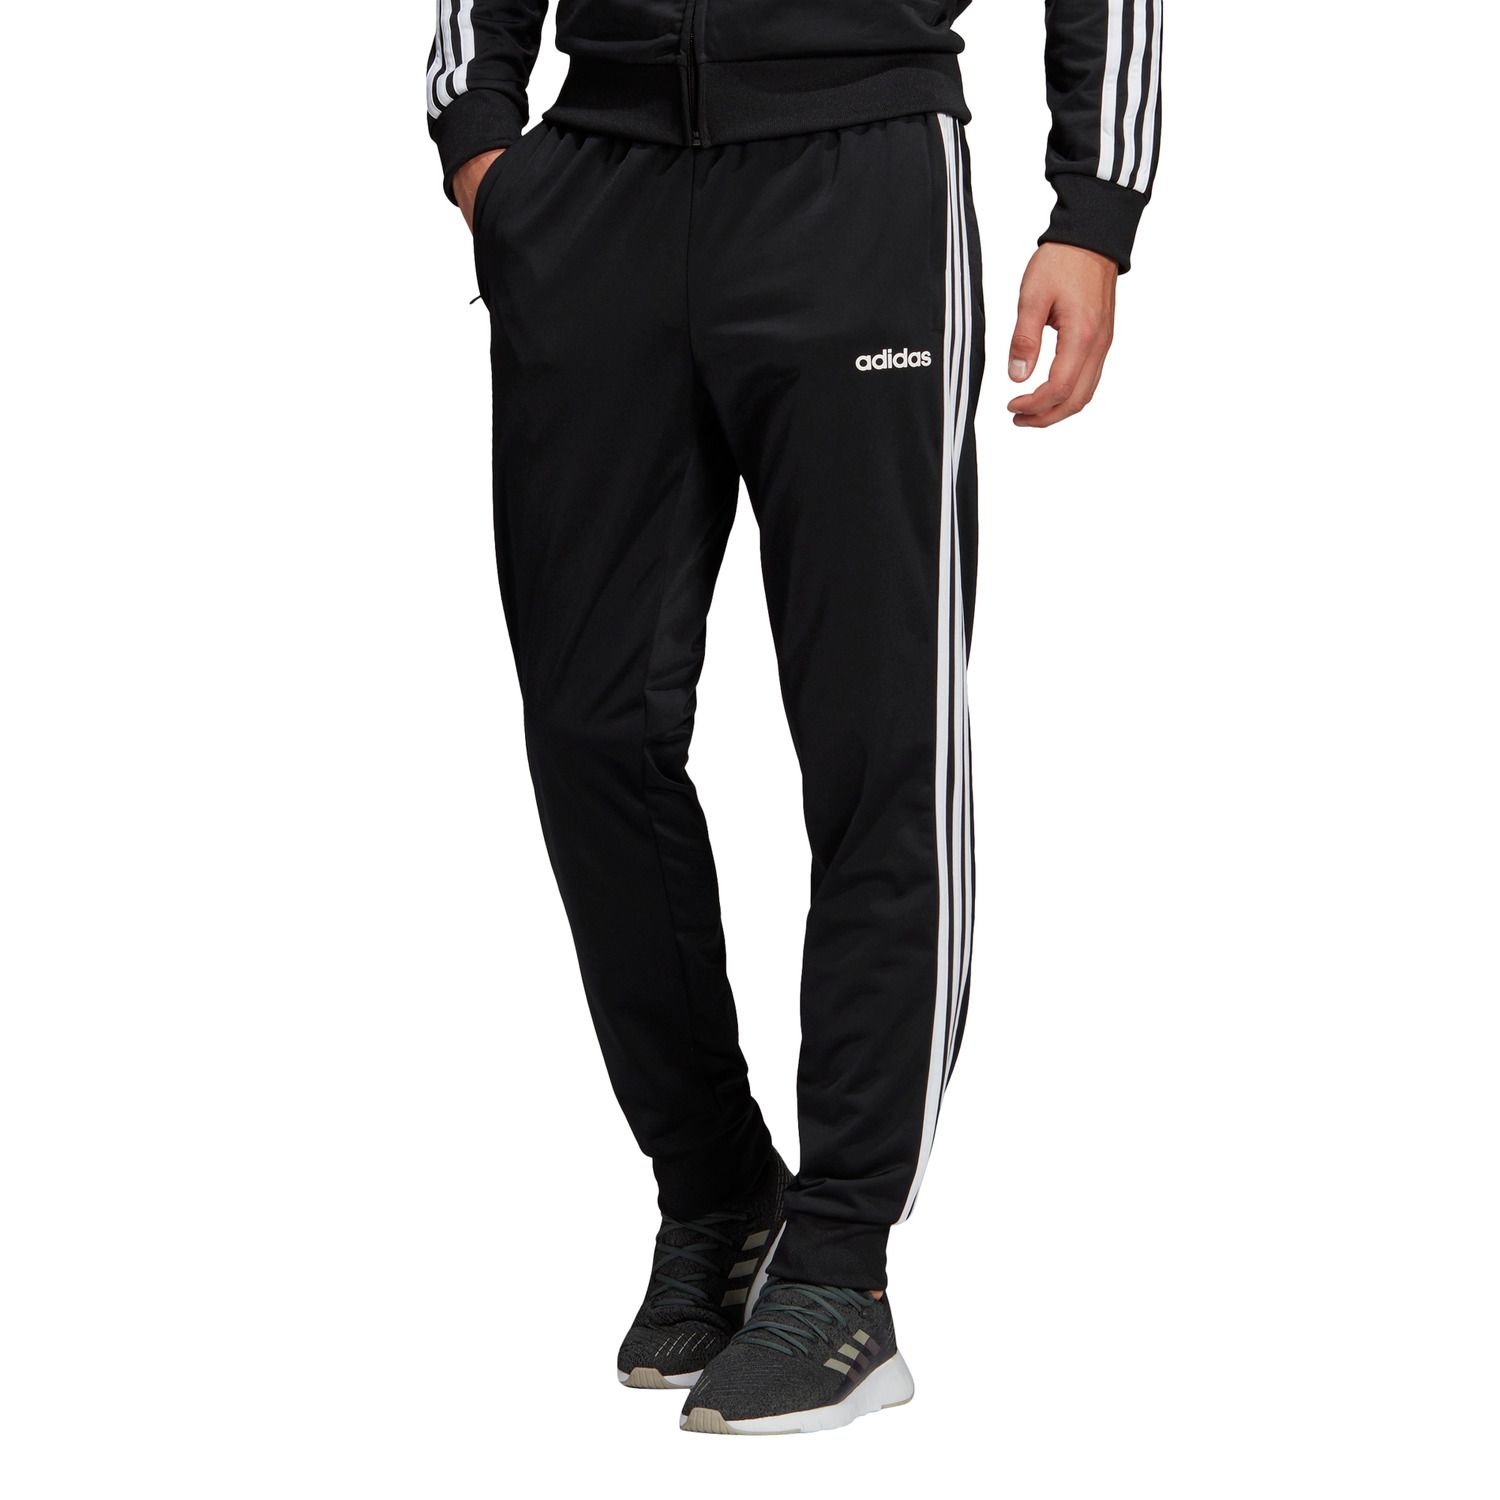 adidas tapered fit football